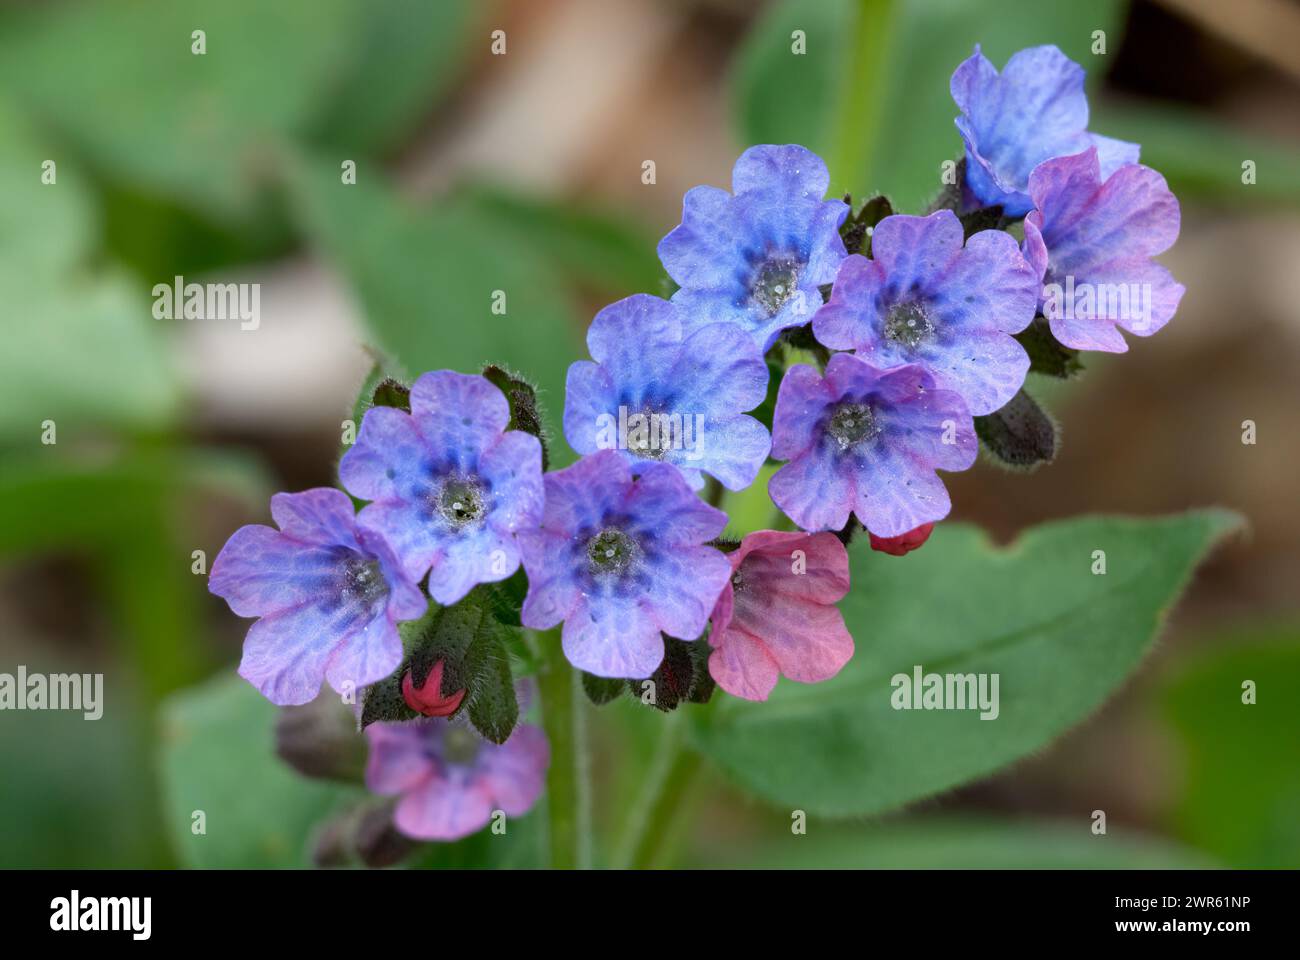 Common lungwort, Pulmonaria officinalis blue flowers, closeup. Medicinal plant, herb. Full bloom, growing on the bank of the lake. Bodovka, Slovakia Stock Photo